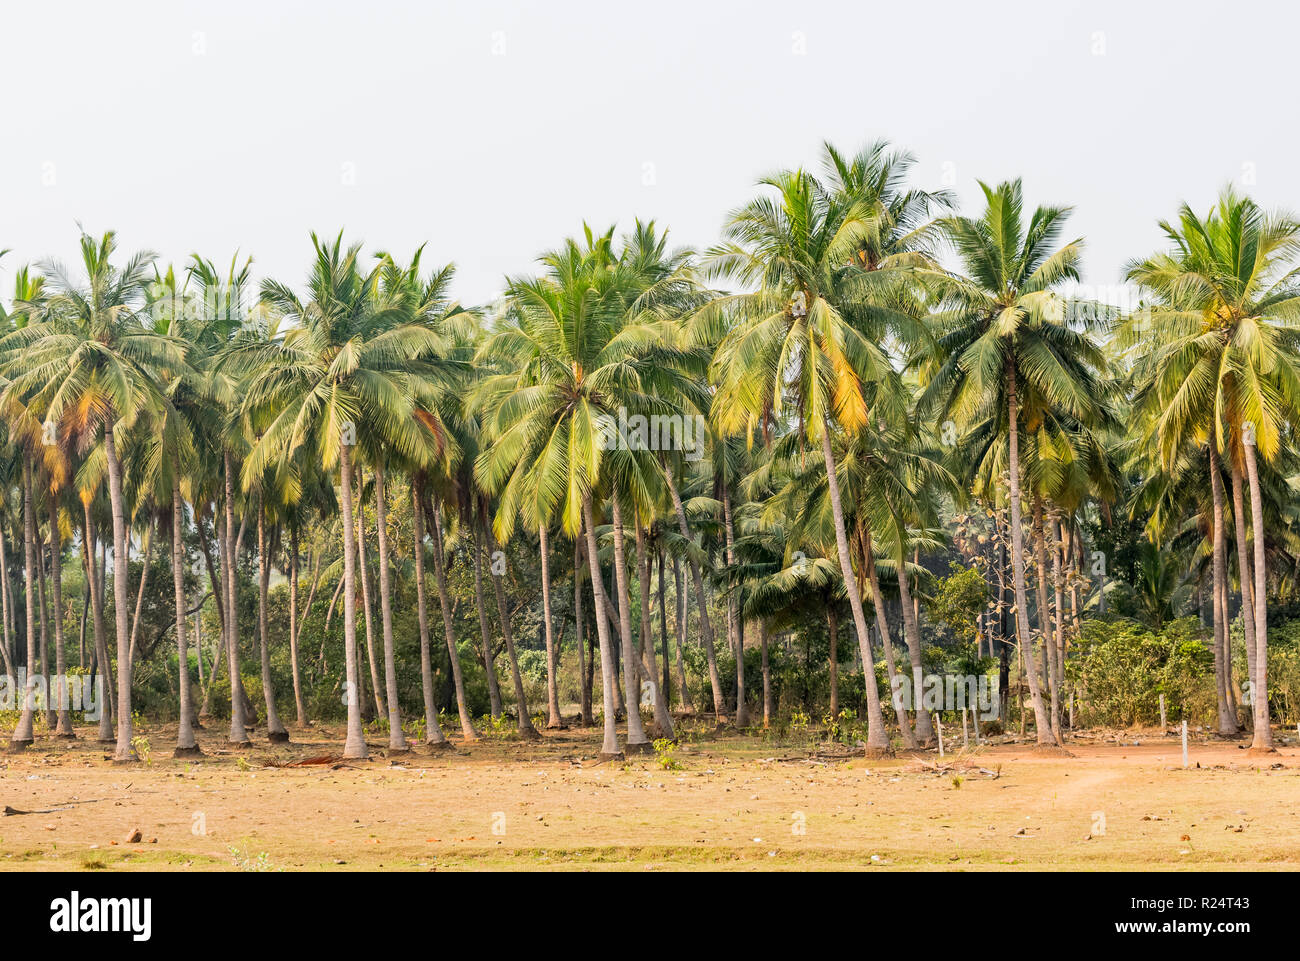 Beautiful tropical Park of coconut trees with long trunks. densely growing coconut trees in a tropical garden. exotic agriculture. Stock Photo